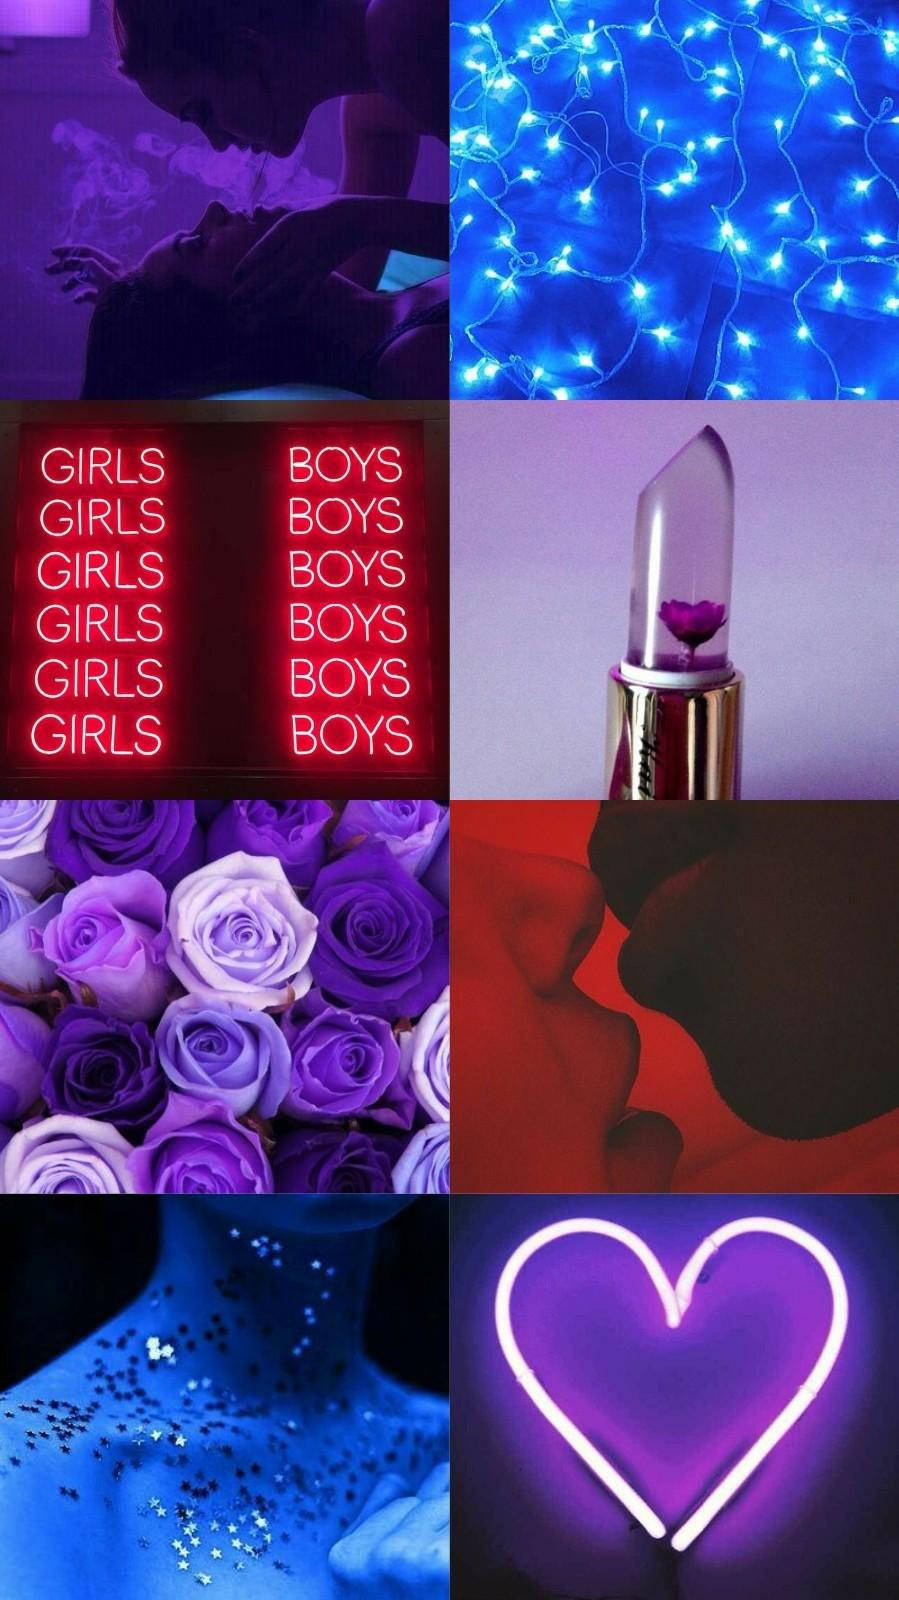 Bisexual Aesthetic Collage